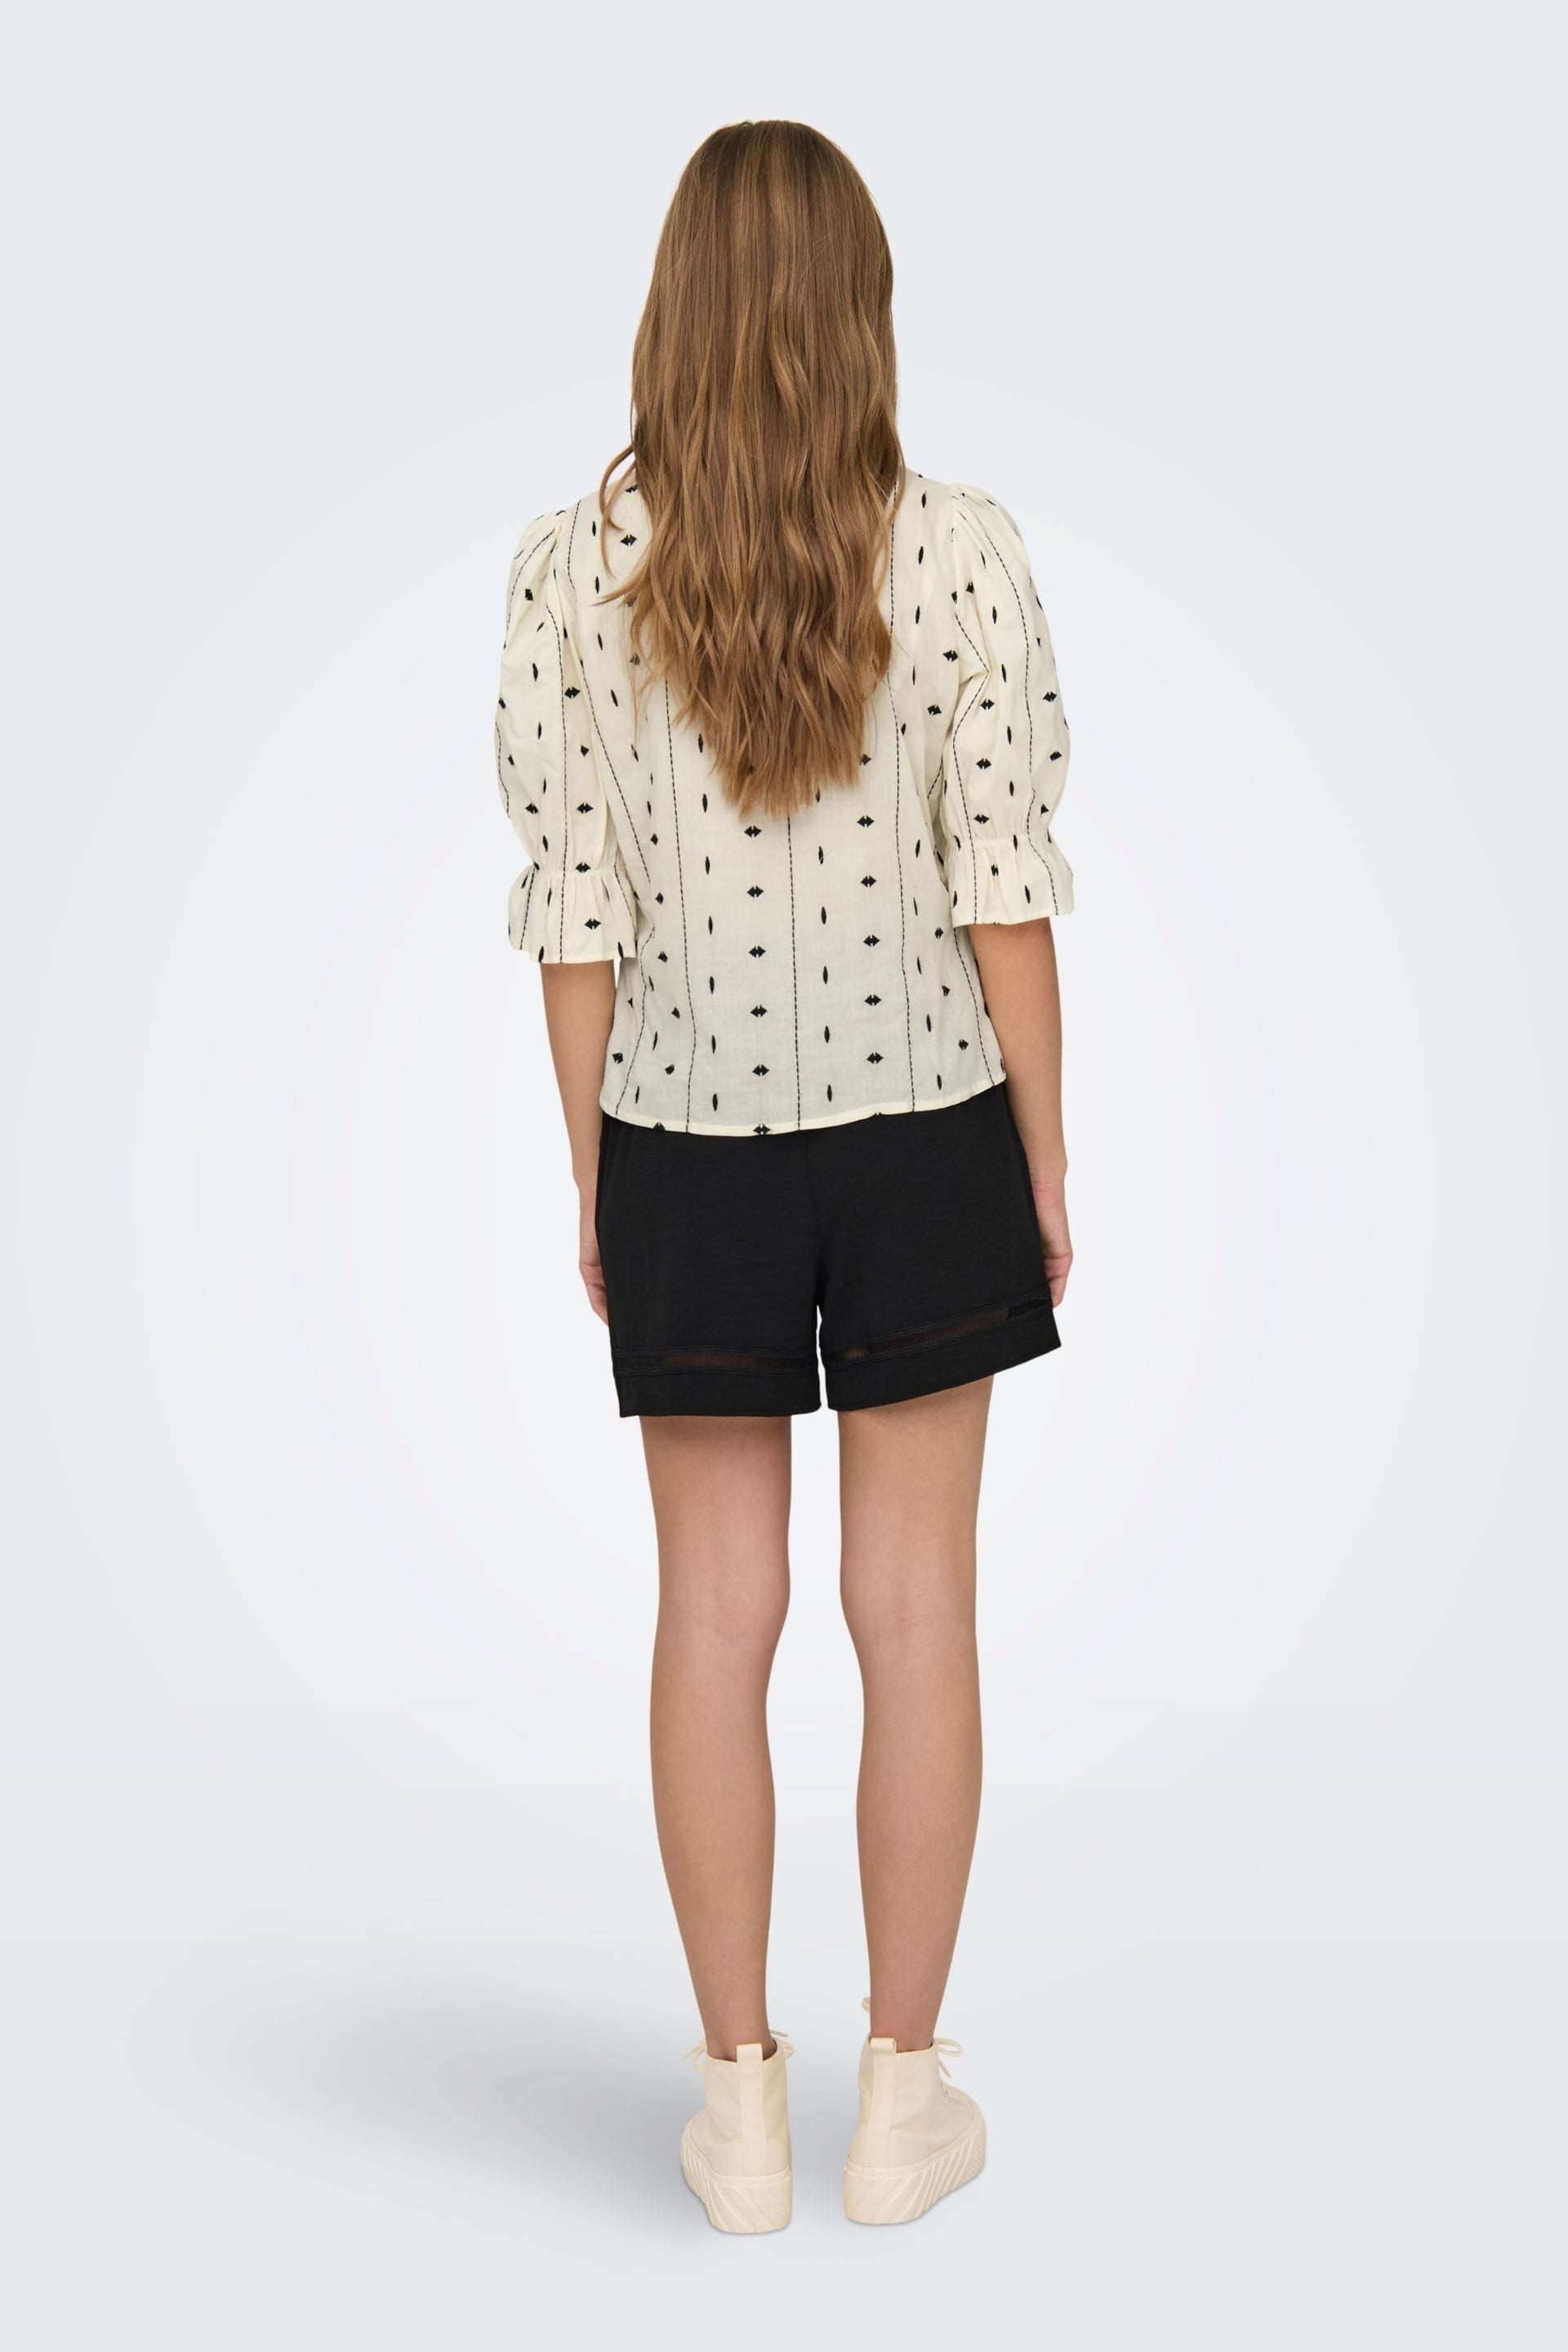 ONLY Cream Embroidered Short Sleeve Button Up Blouse - Image 6 of 8